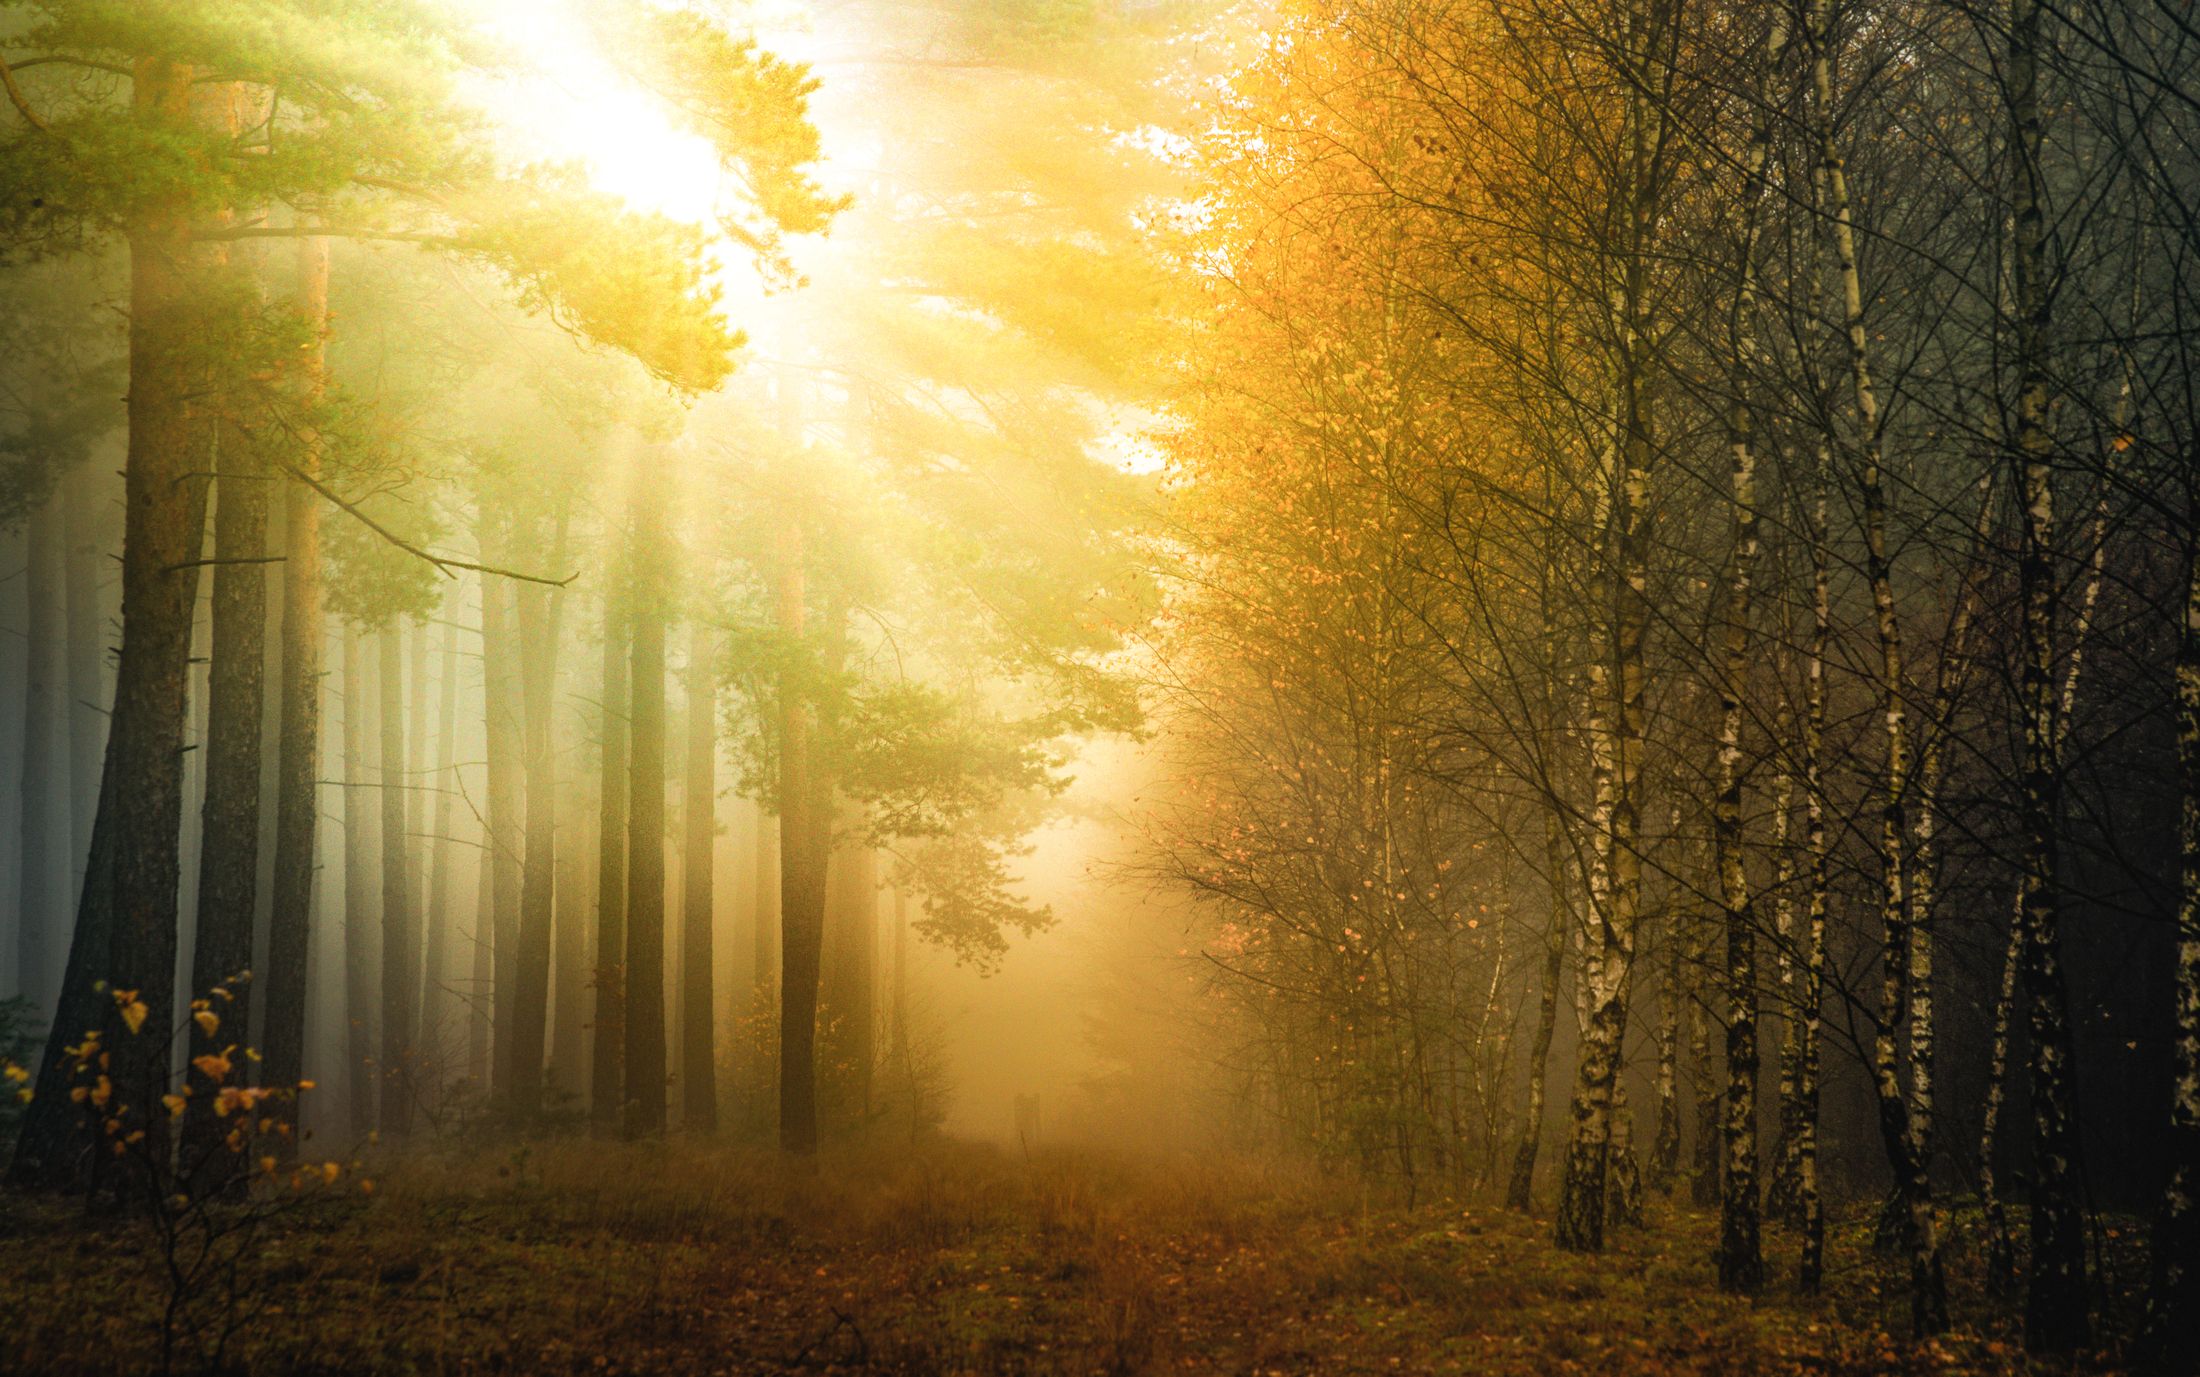 forest  autumn 2021  forest road  sunrise  light  forest atmosphere  sun  trees  birches  nature  landscape  Photography  Scenics - Nature  Beauty In Nature, Krzysztof Tollas